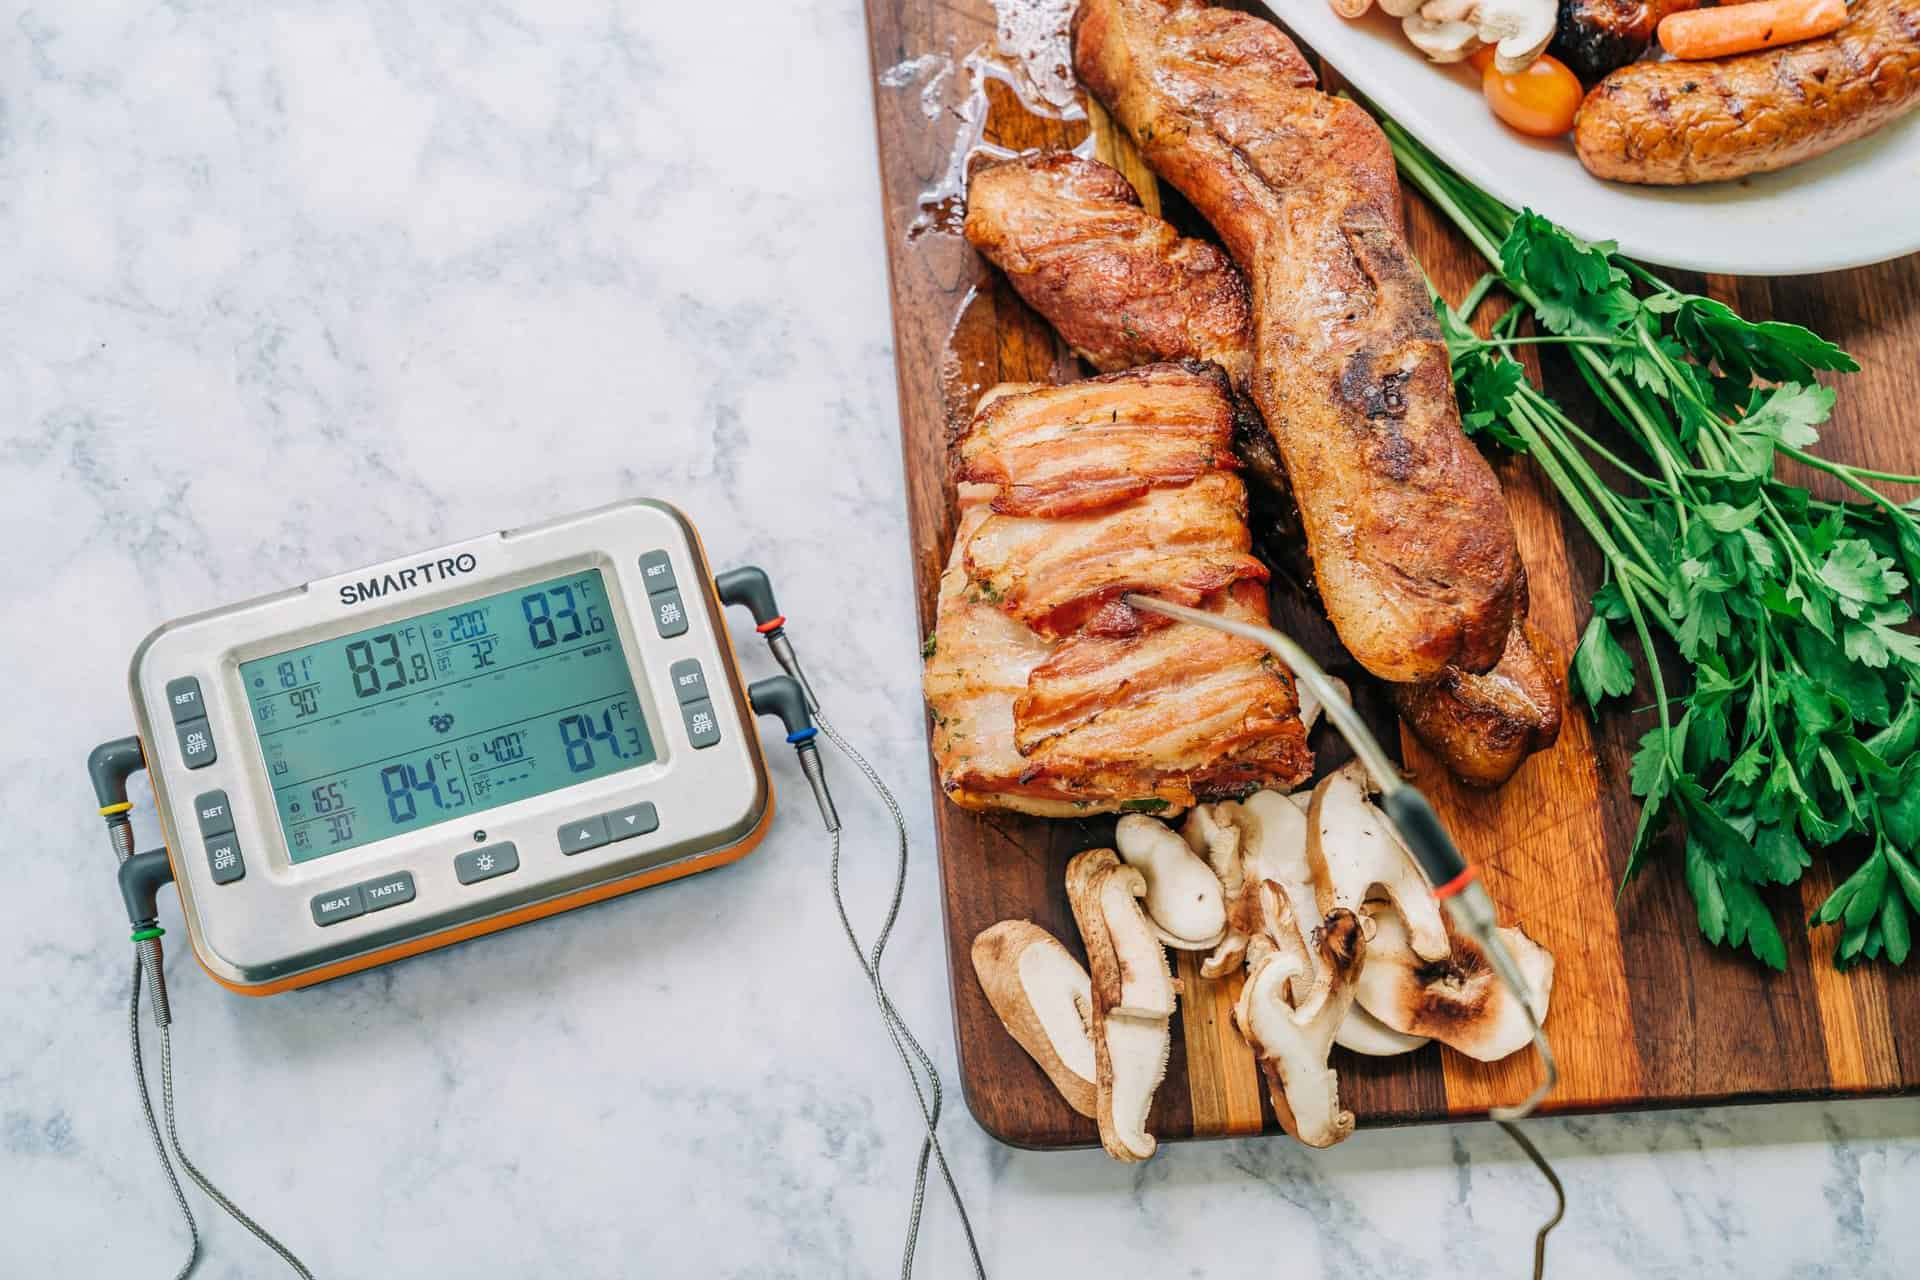 https://www.chefstemp.com/wp-content/uploads/2022/10/smartro-X50-Wireless-Meat-Thermometer-4-Probes-5-scaled.jpg